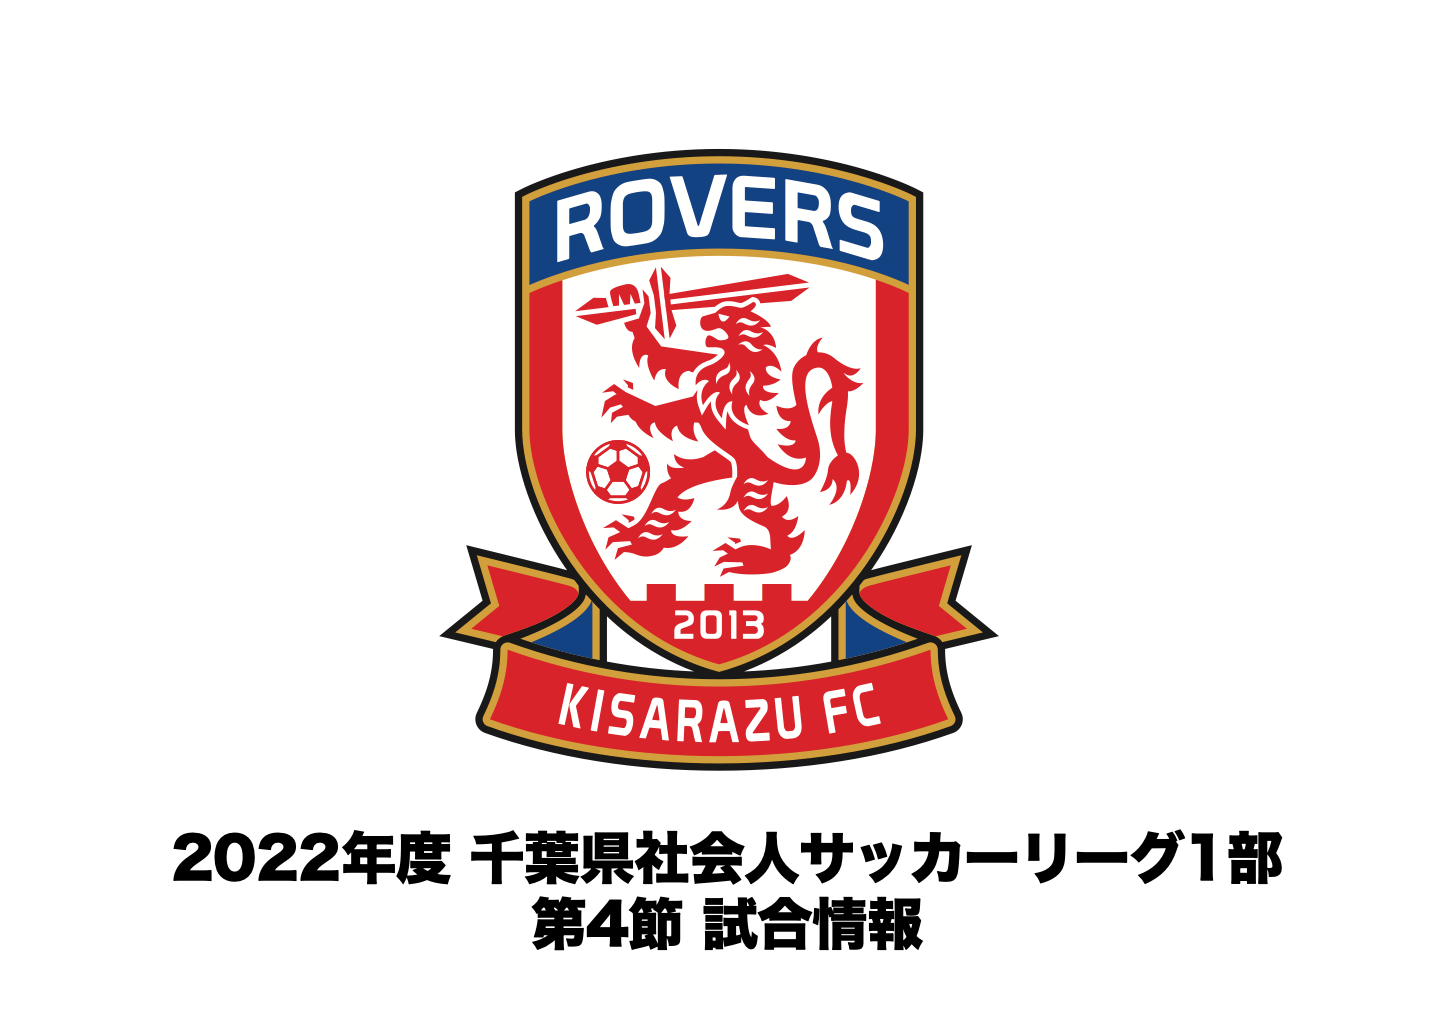 You are currently viewing 【試合情報】2022年度 千葉県社会人サッカーリーグ1部 第4節について